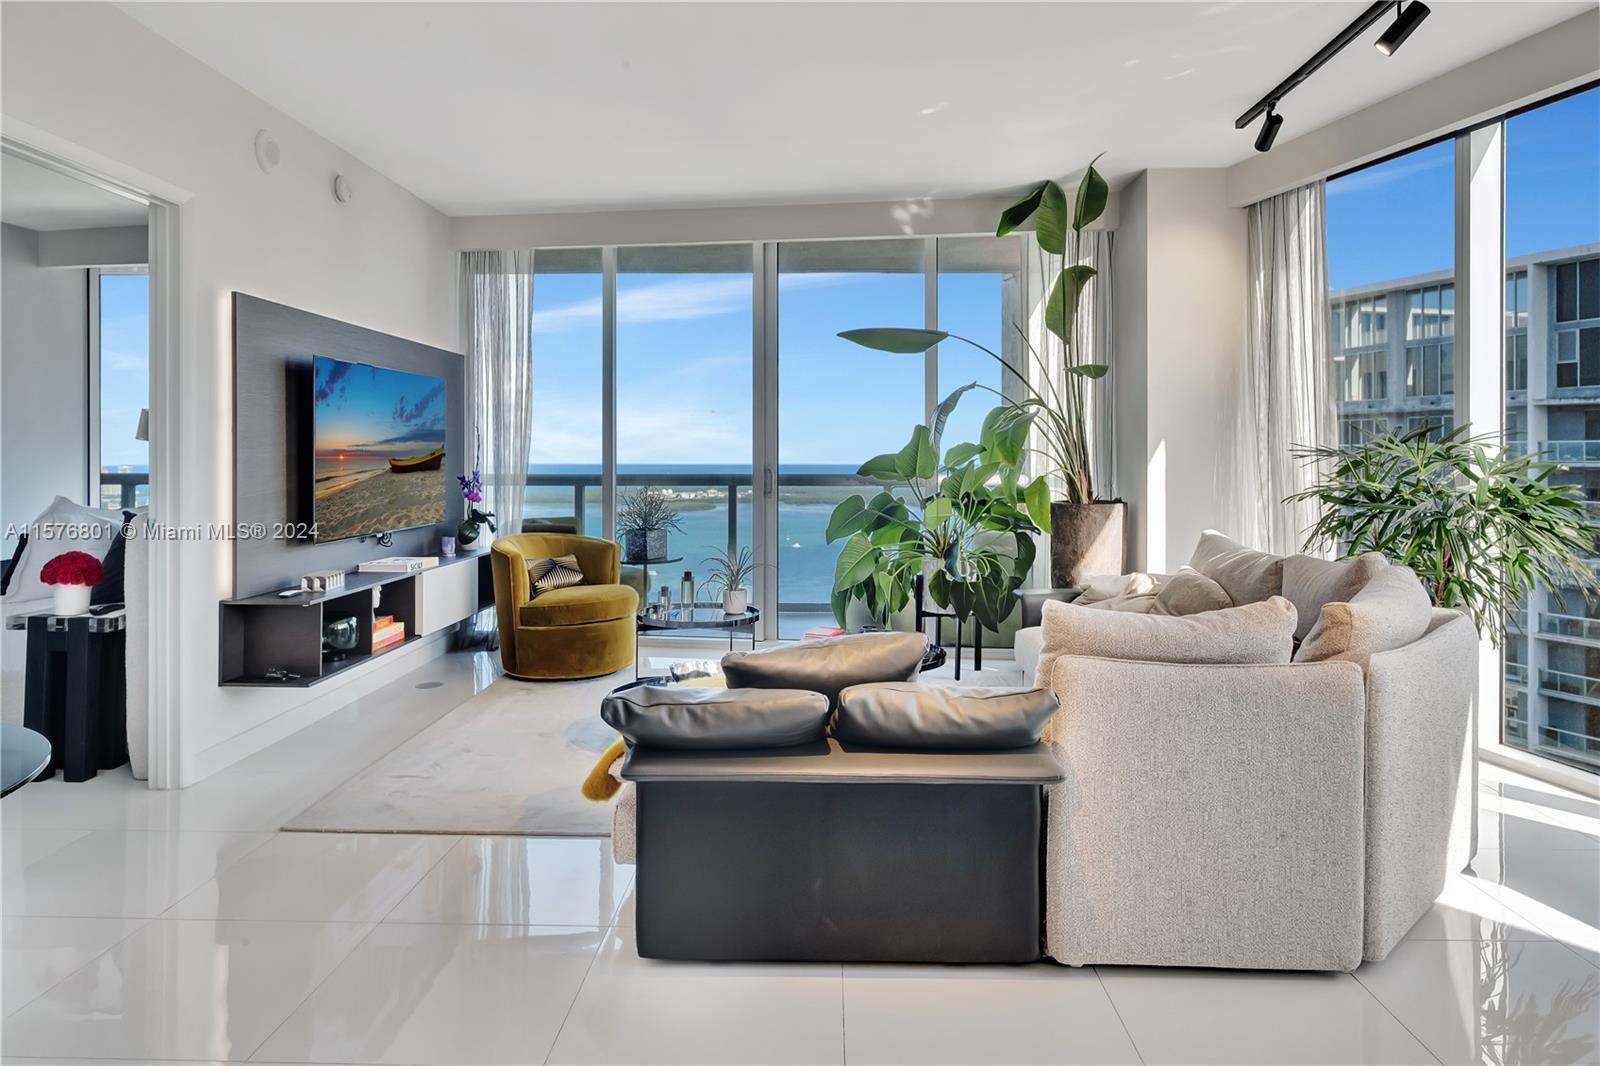 Introducing the lower penthouse at Icon Brickell, where you'll be captivated by the breathtaking wat